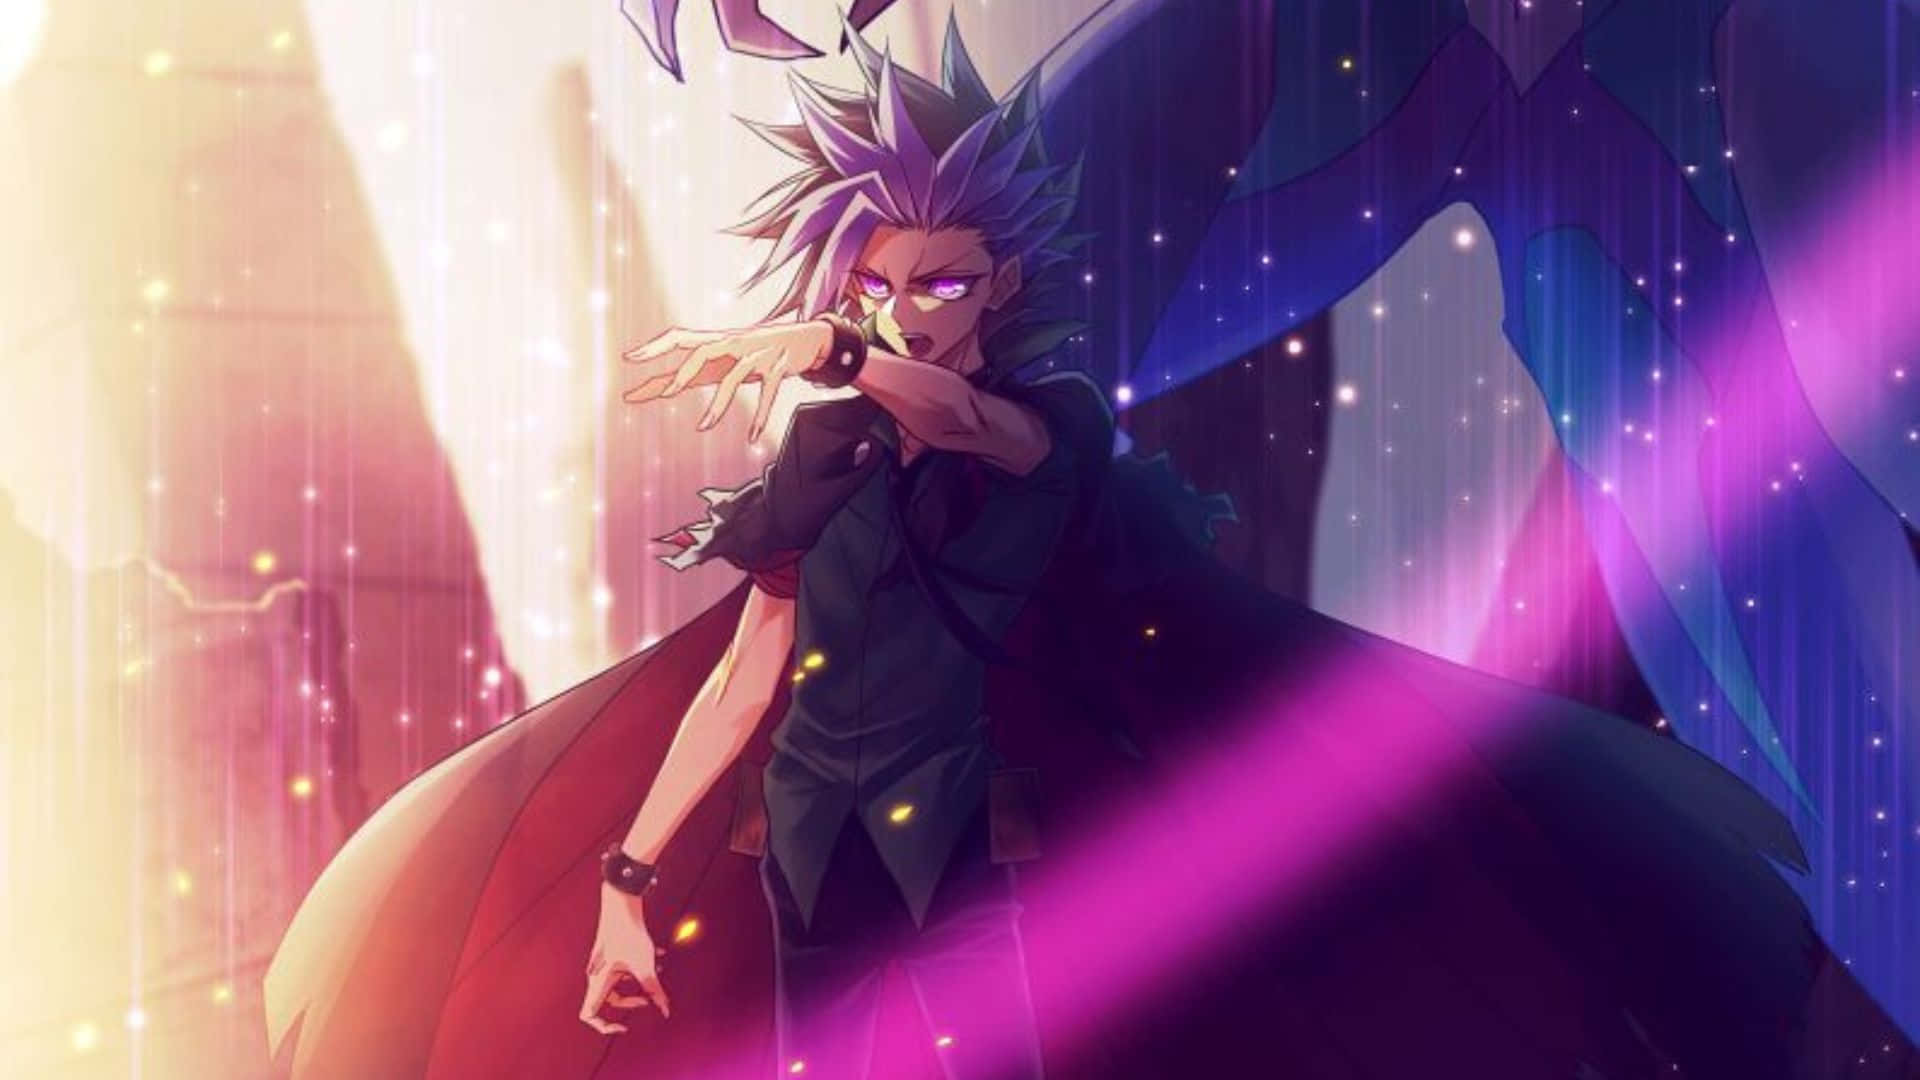 Yu-Gi-Oh! - Yuto with Phantom Knights Deck in Duel Mode Wallpaper